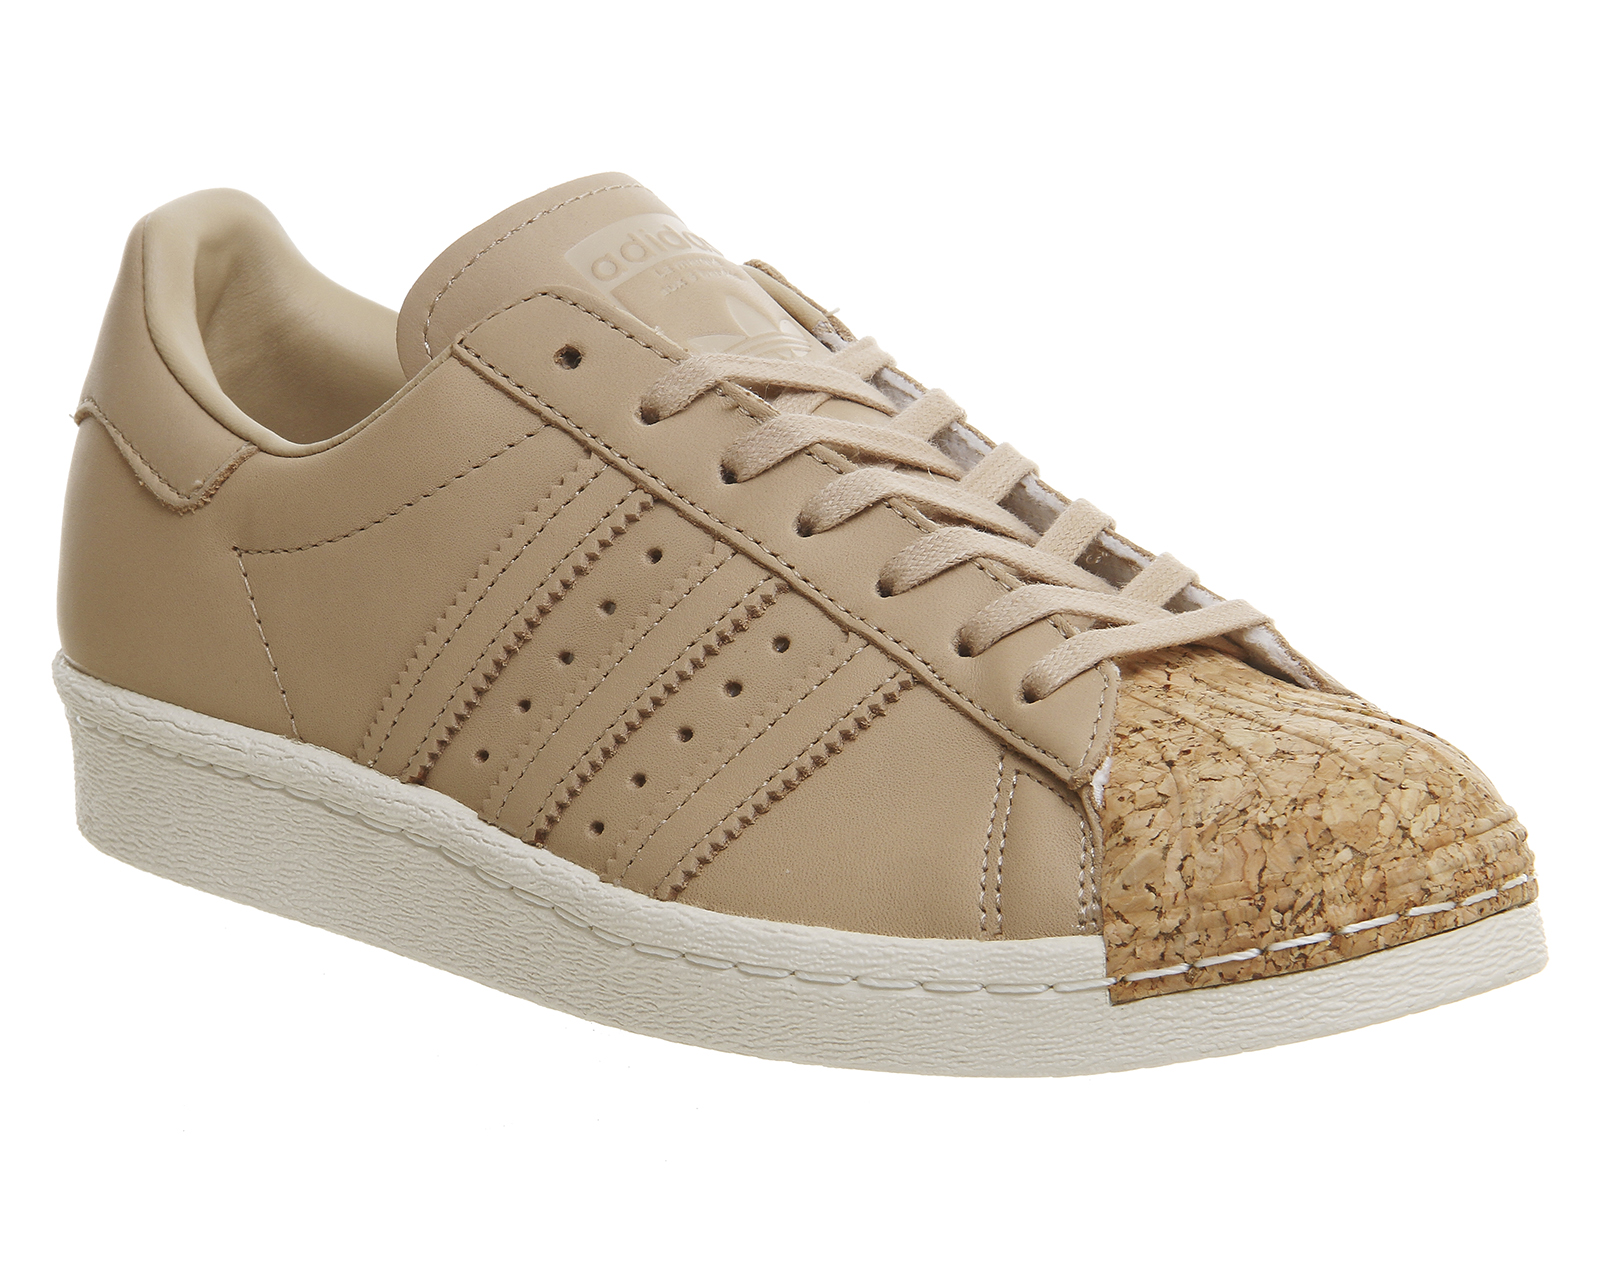 adidas Superstar 80s Pale Nude Cork Toe - Hers trainers